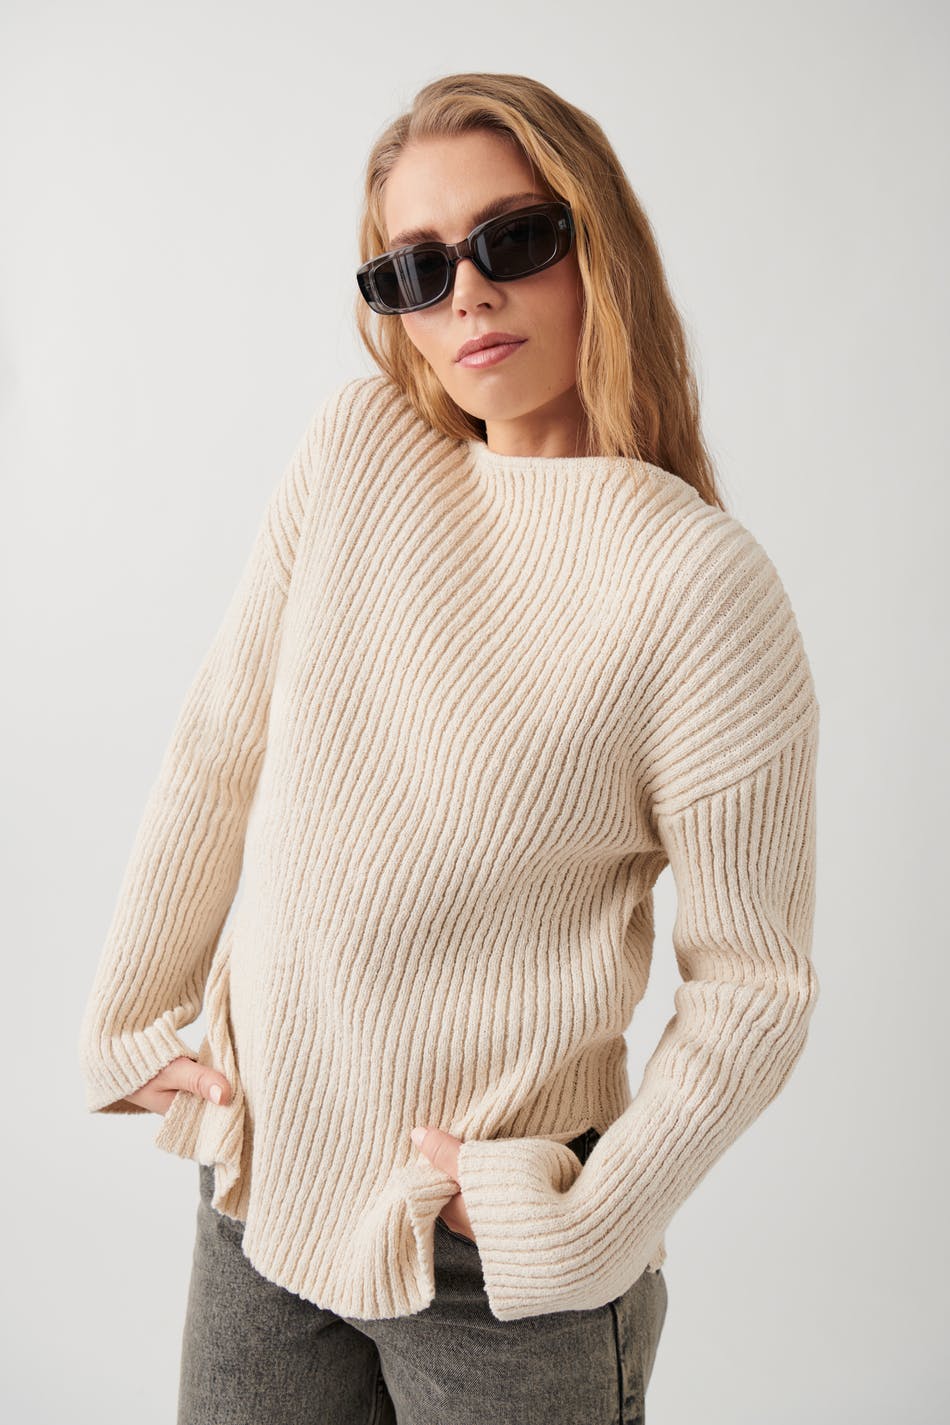 Gina Tricot - Knitted boatneck sweater - stickade tröjor - White - XS - Female